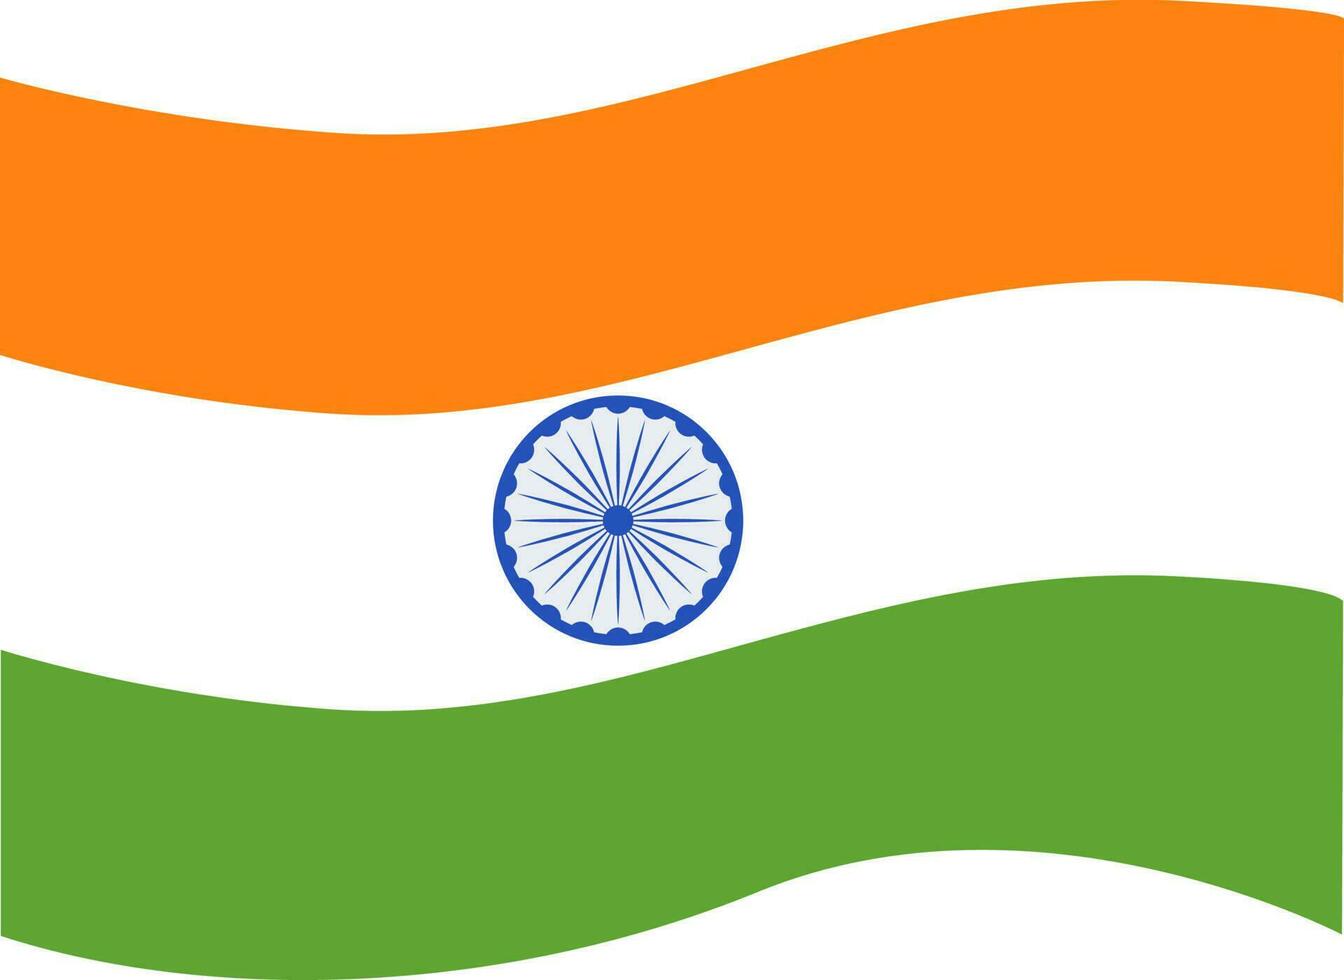 Tricolor Wavy Indian National Flag In Flat Design. vector